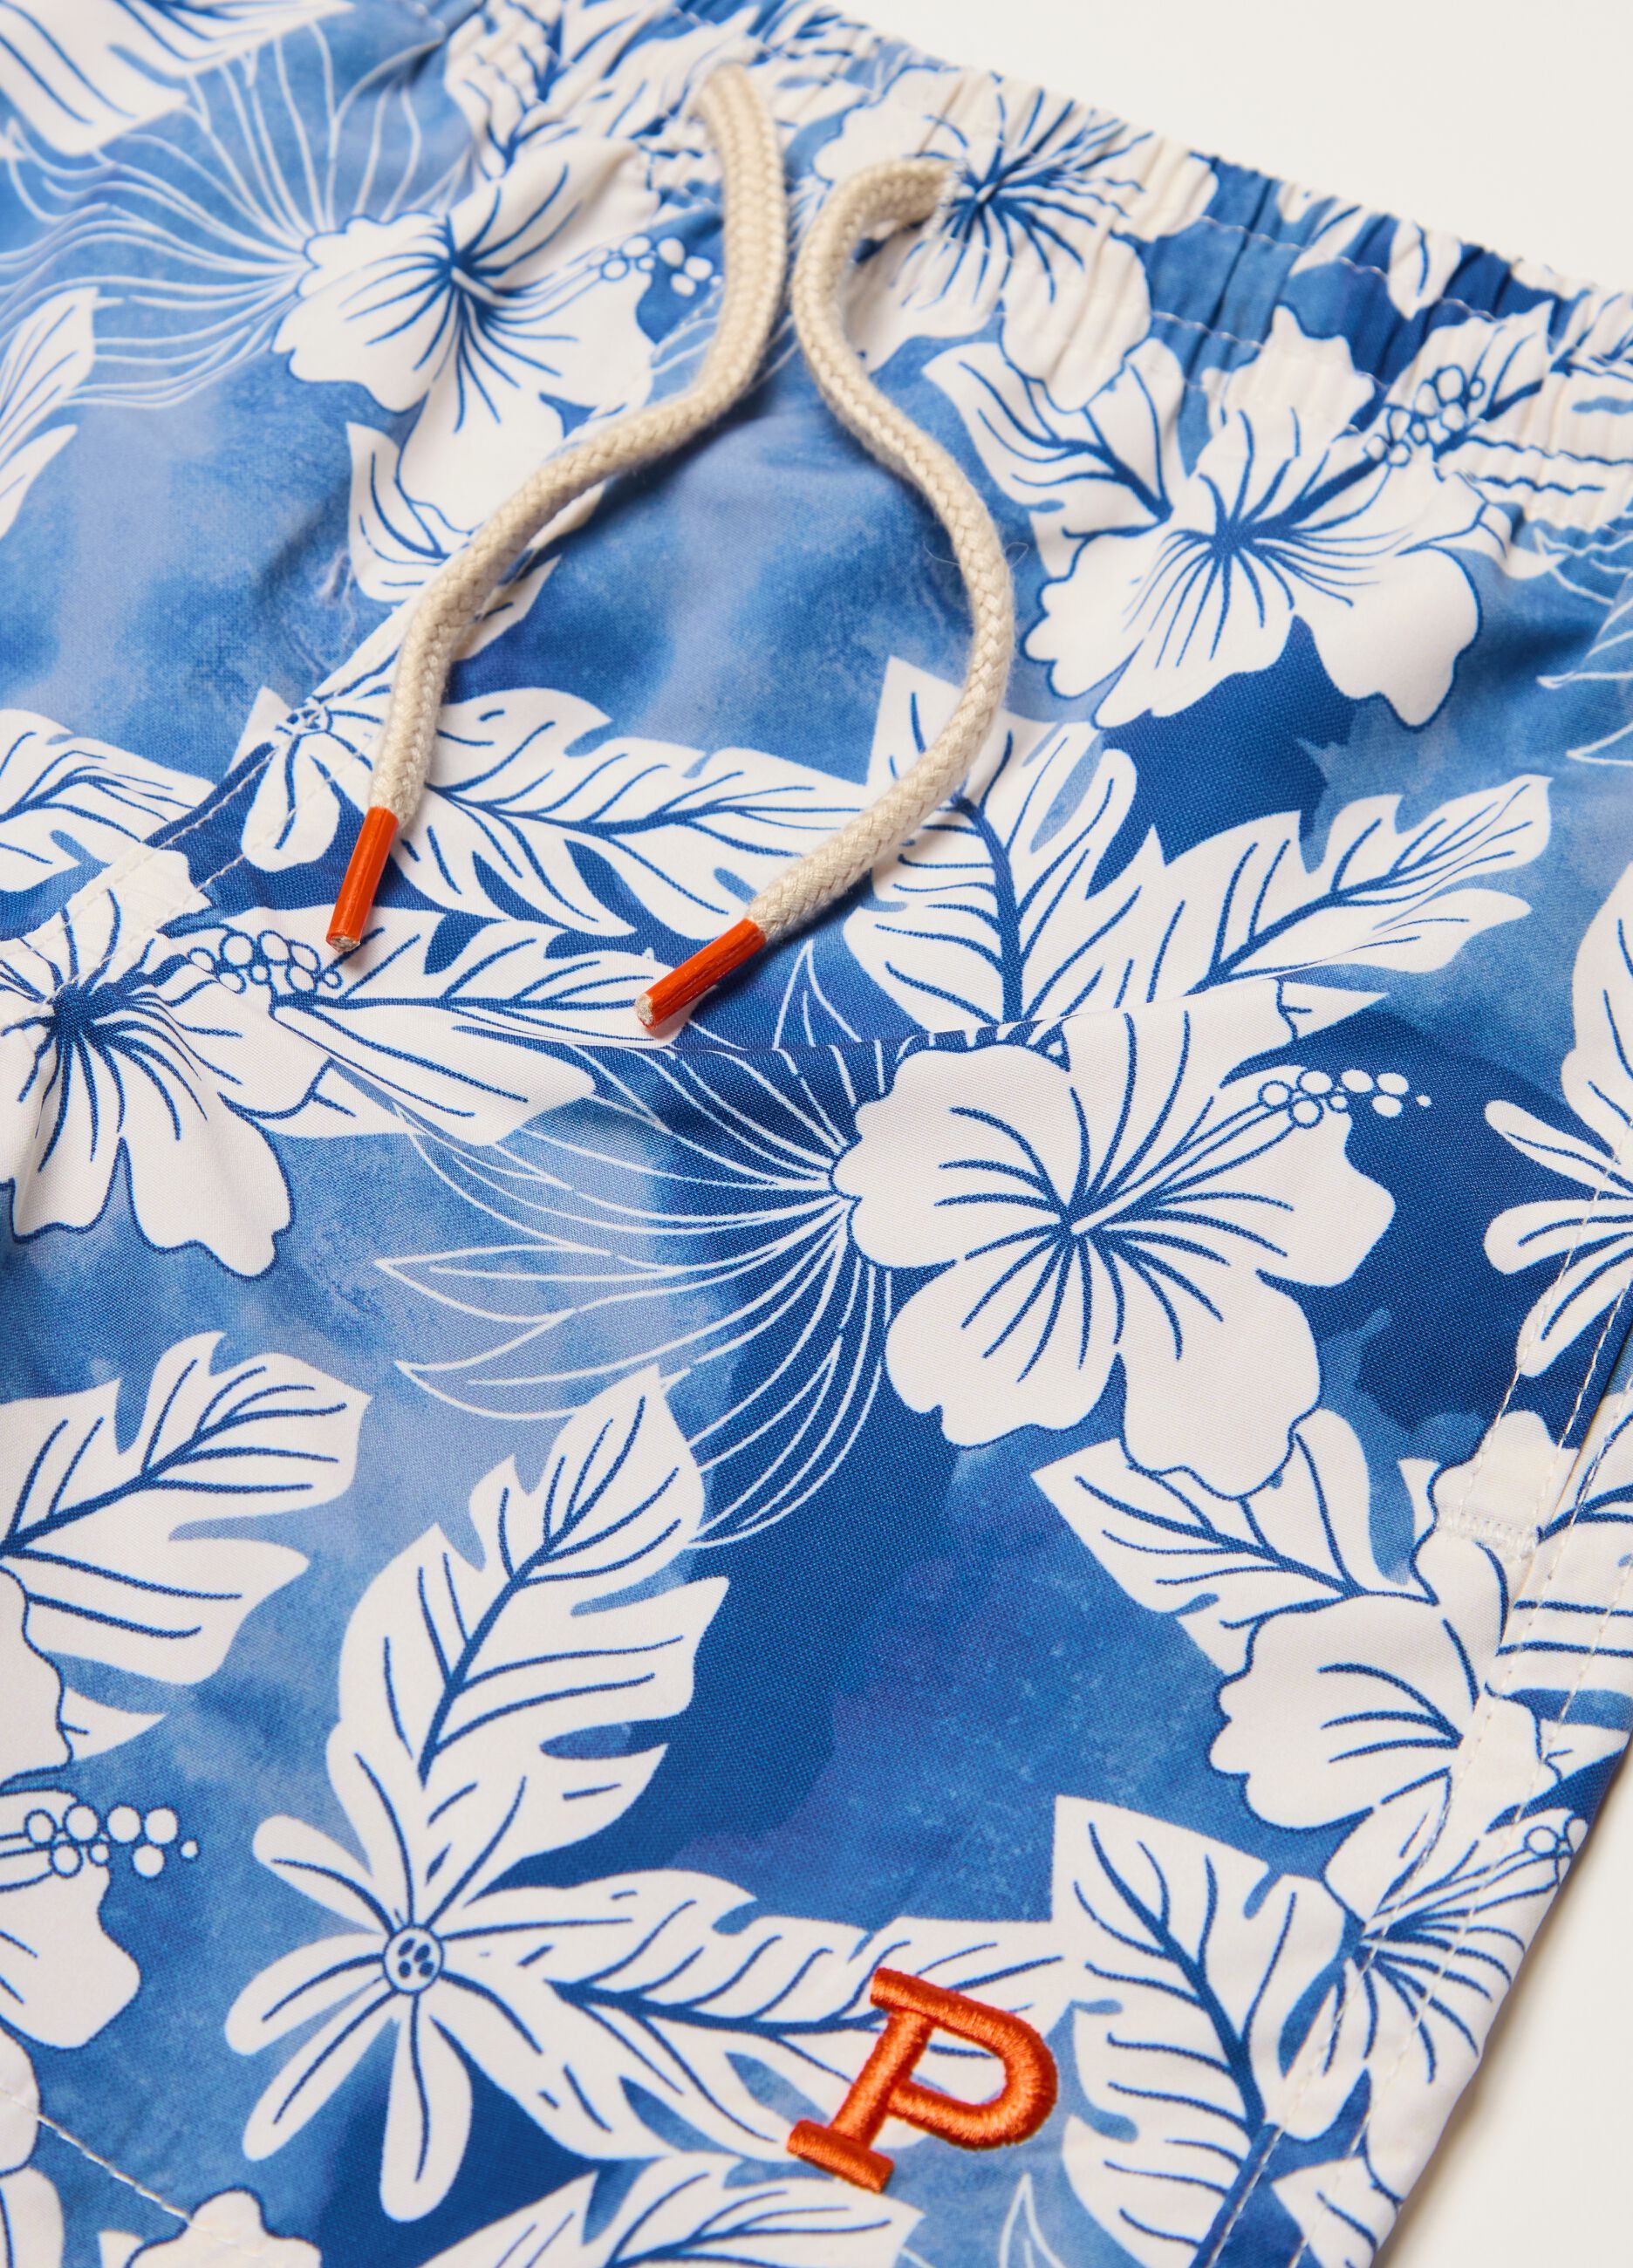 Swimming trunks with drawstring and tropical print